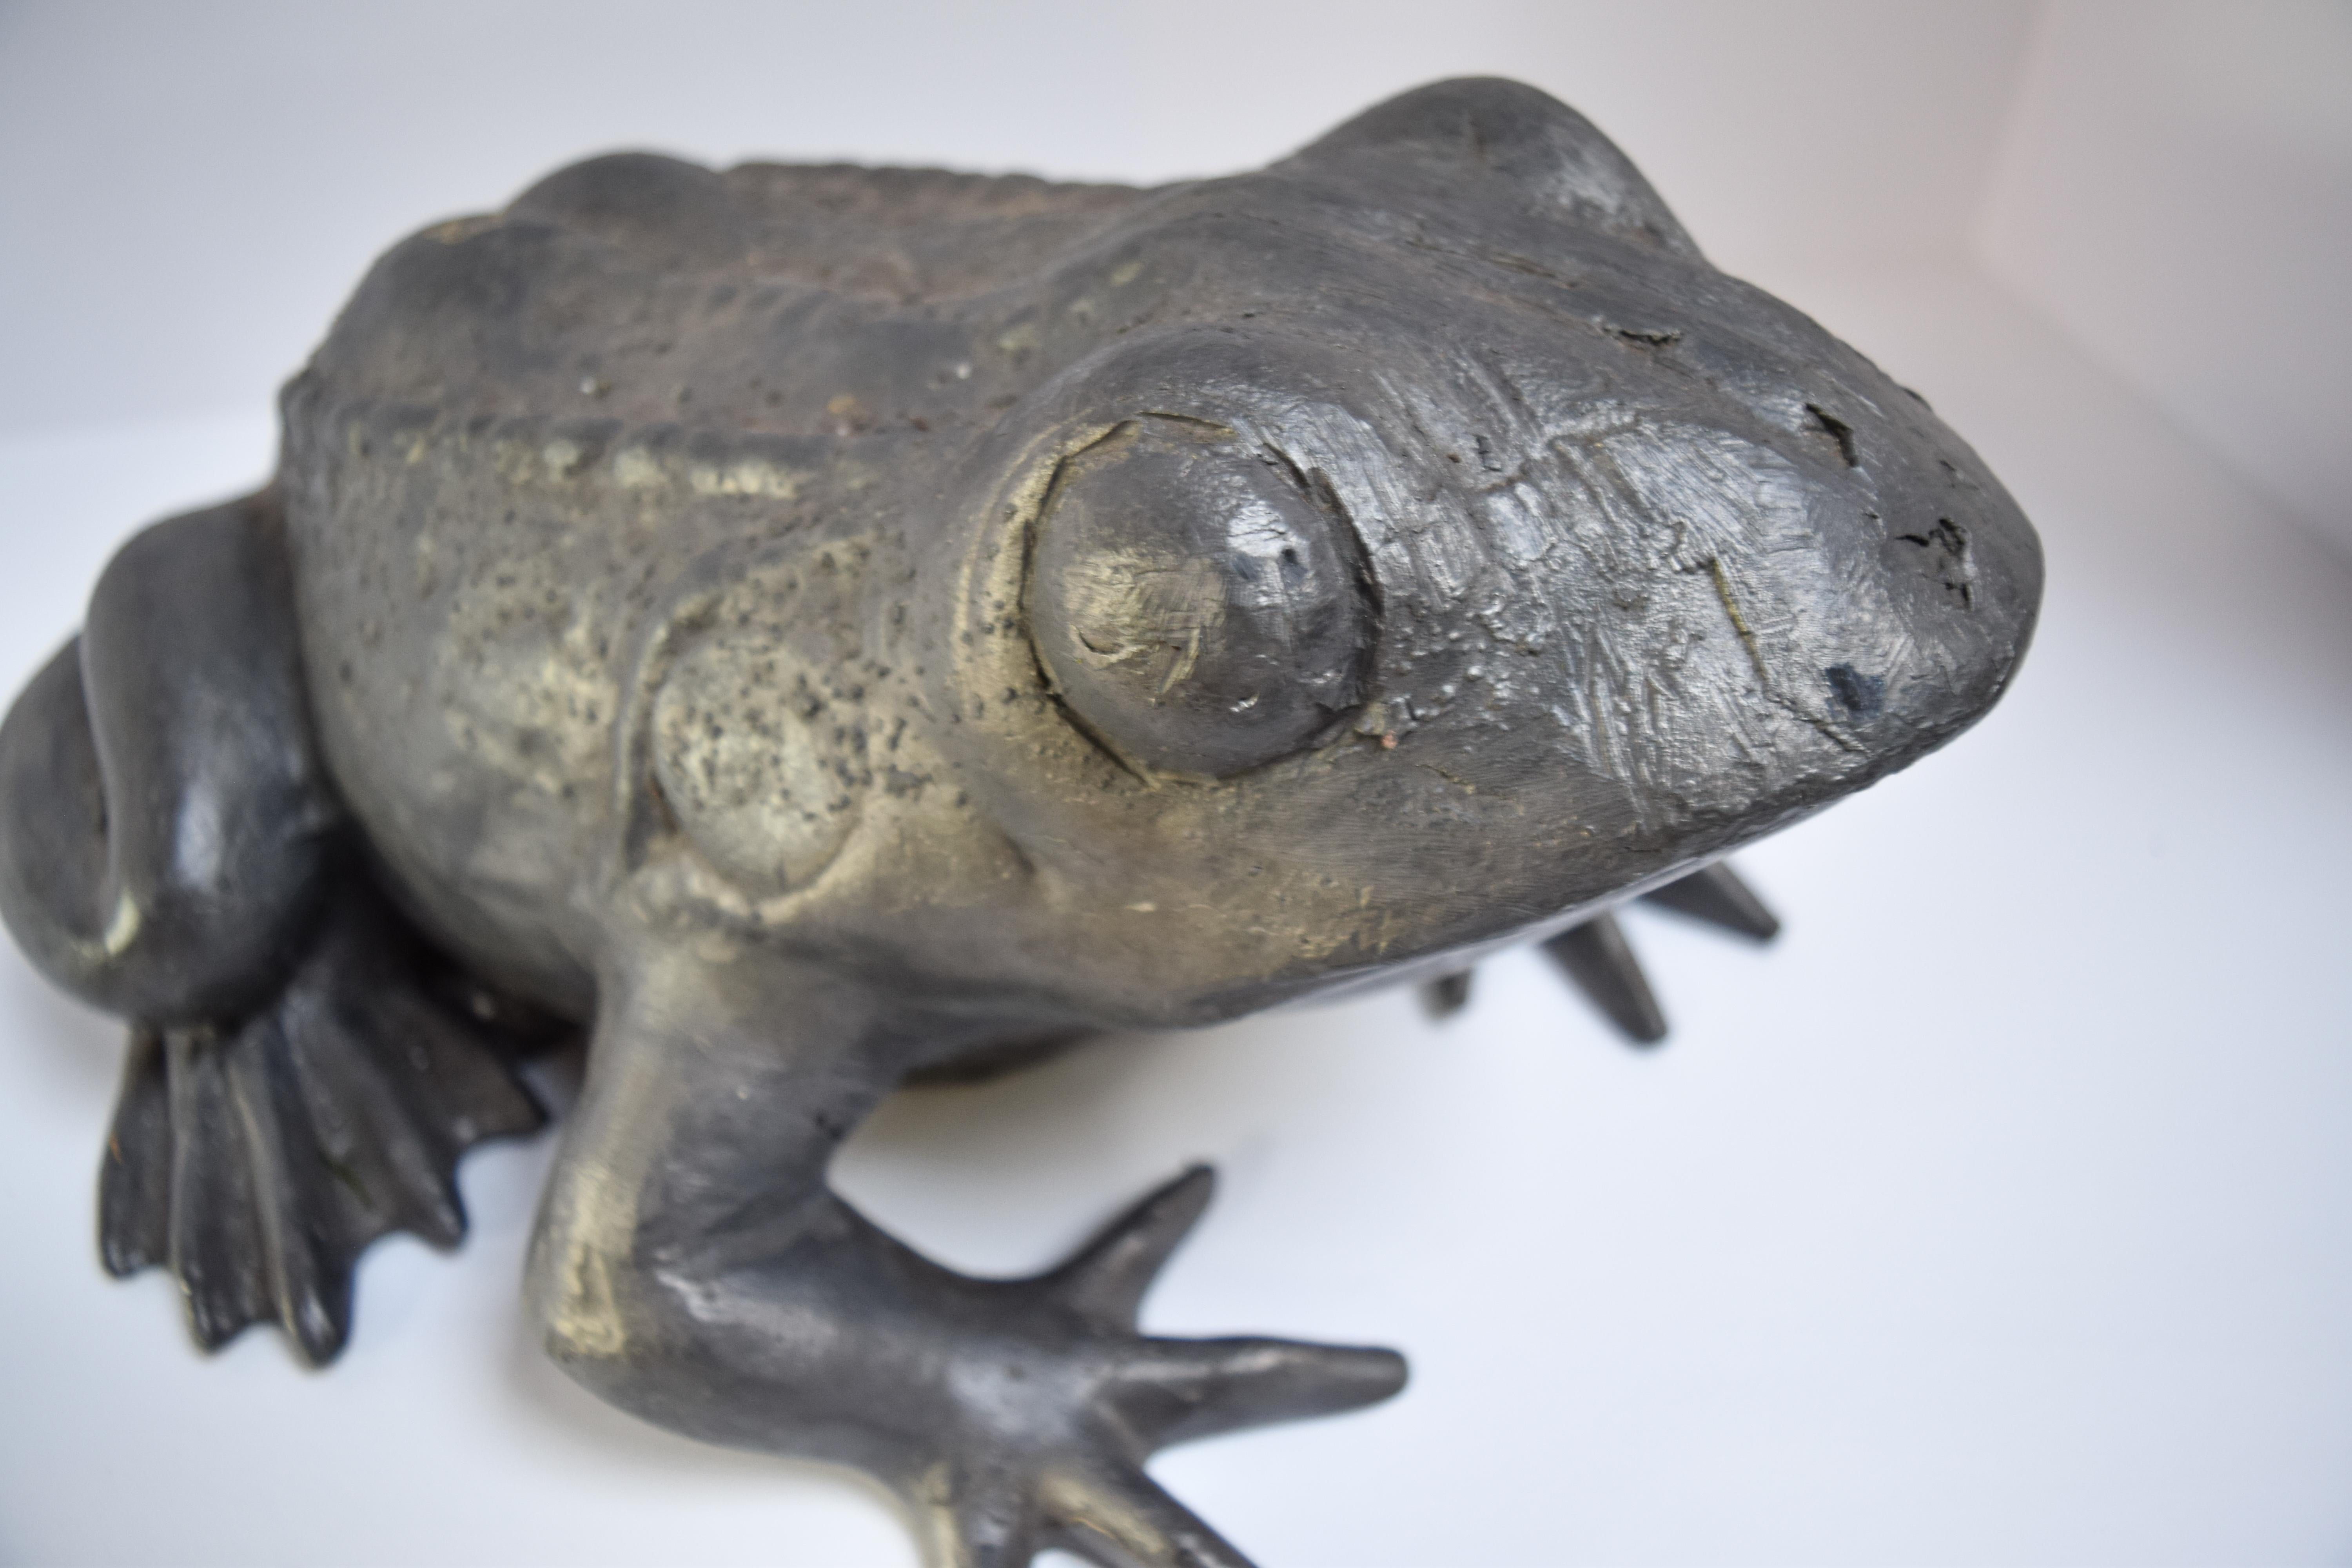 A modern take on a Classic artform, Stephen Markham’s techniques transcends the time-honored craft of lead work into a contemporary landscape.
This charming frog statue is entirely cast in British lead and will prove to be a timeless addition to